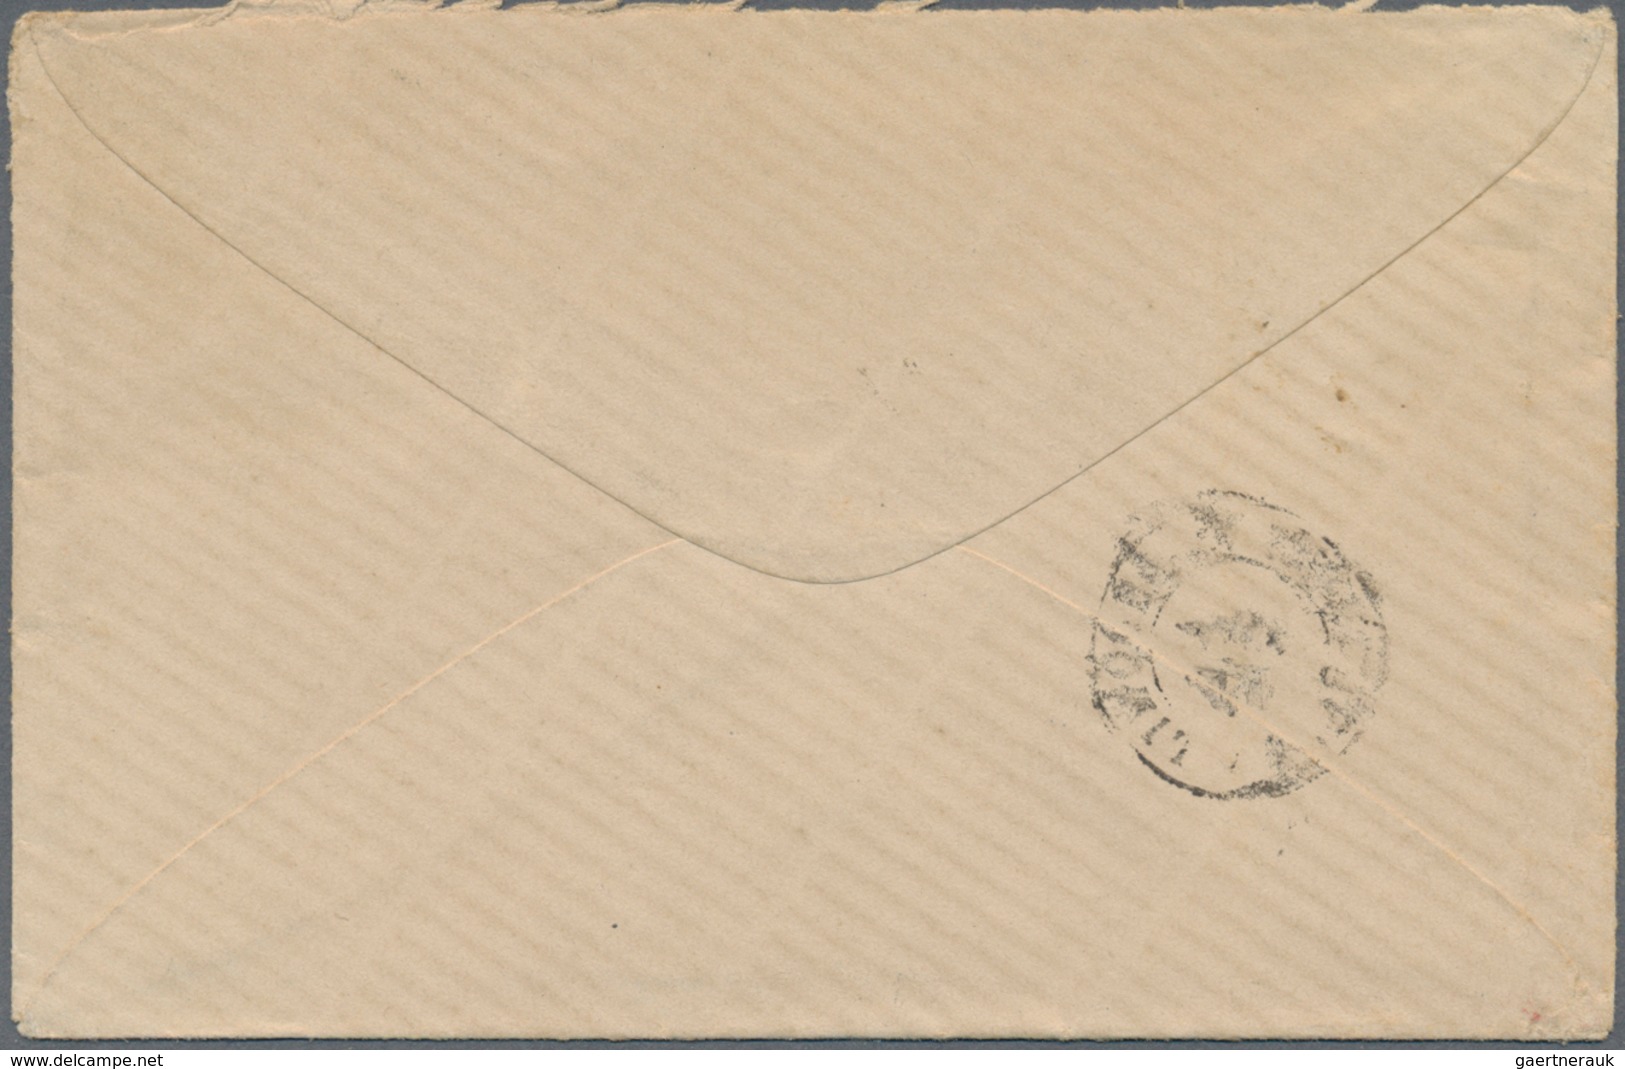 Philippinen: 1879. Envelope Addressed To The French Scientific Mission In Manila, Philippines Bearin - Philippines